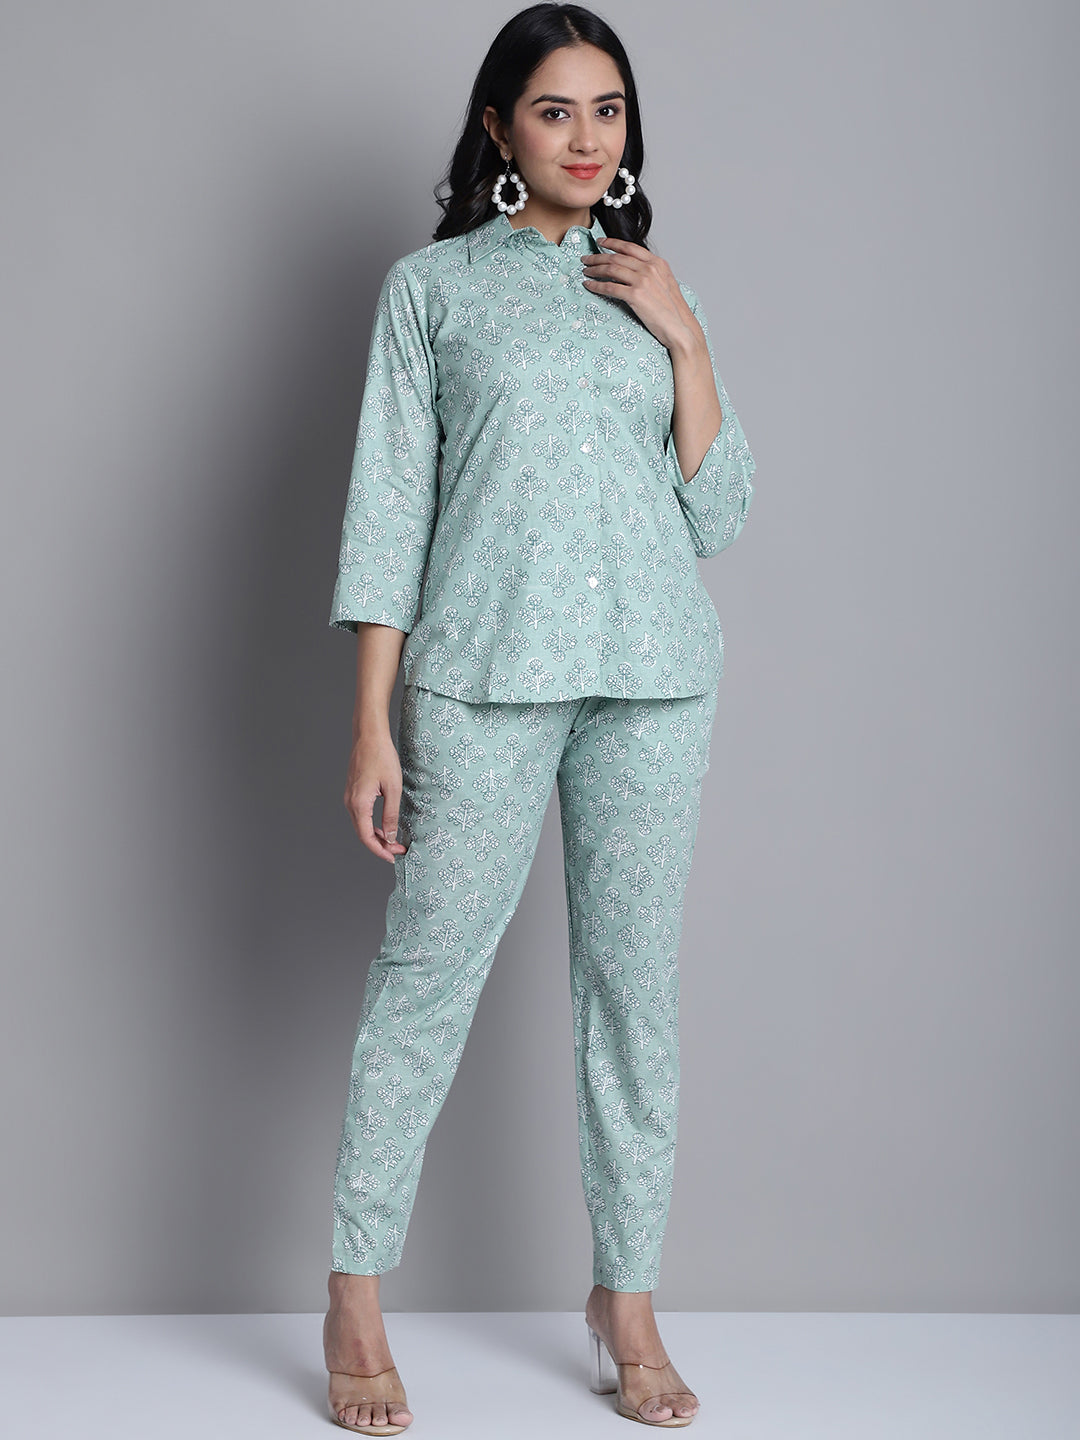 Women's Lime Green Printed Shirt and Trouser Co-ords Set